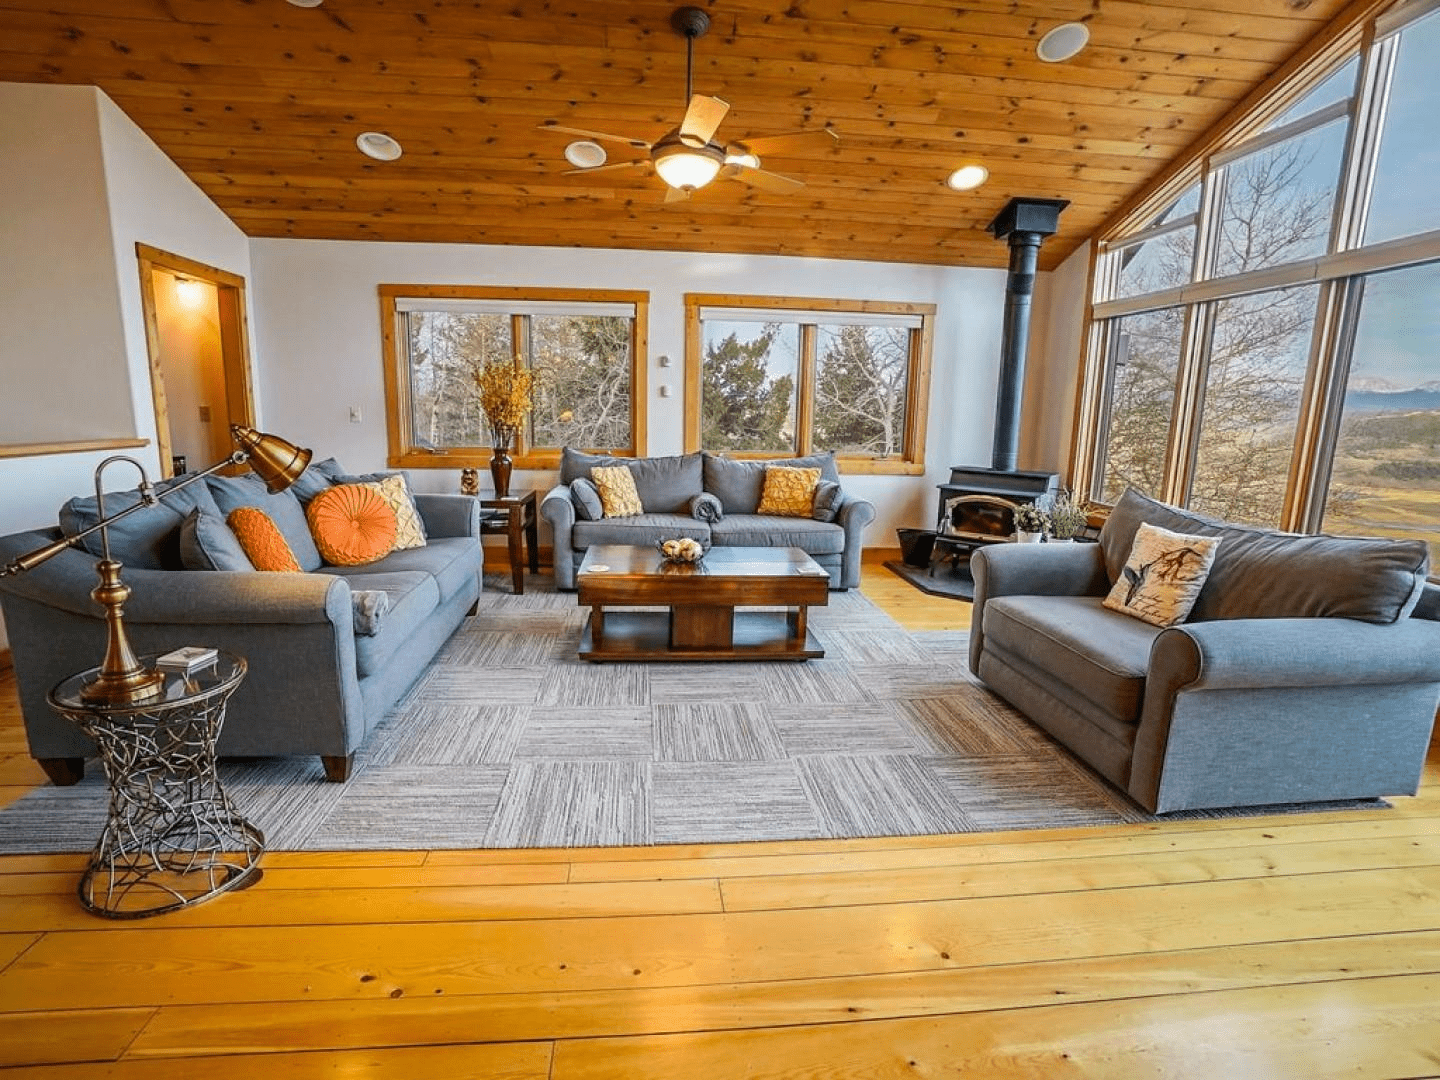 An interior view of the living room for Whispering Aspens from Resort Management Group Rocky Mountain cabins.